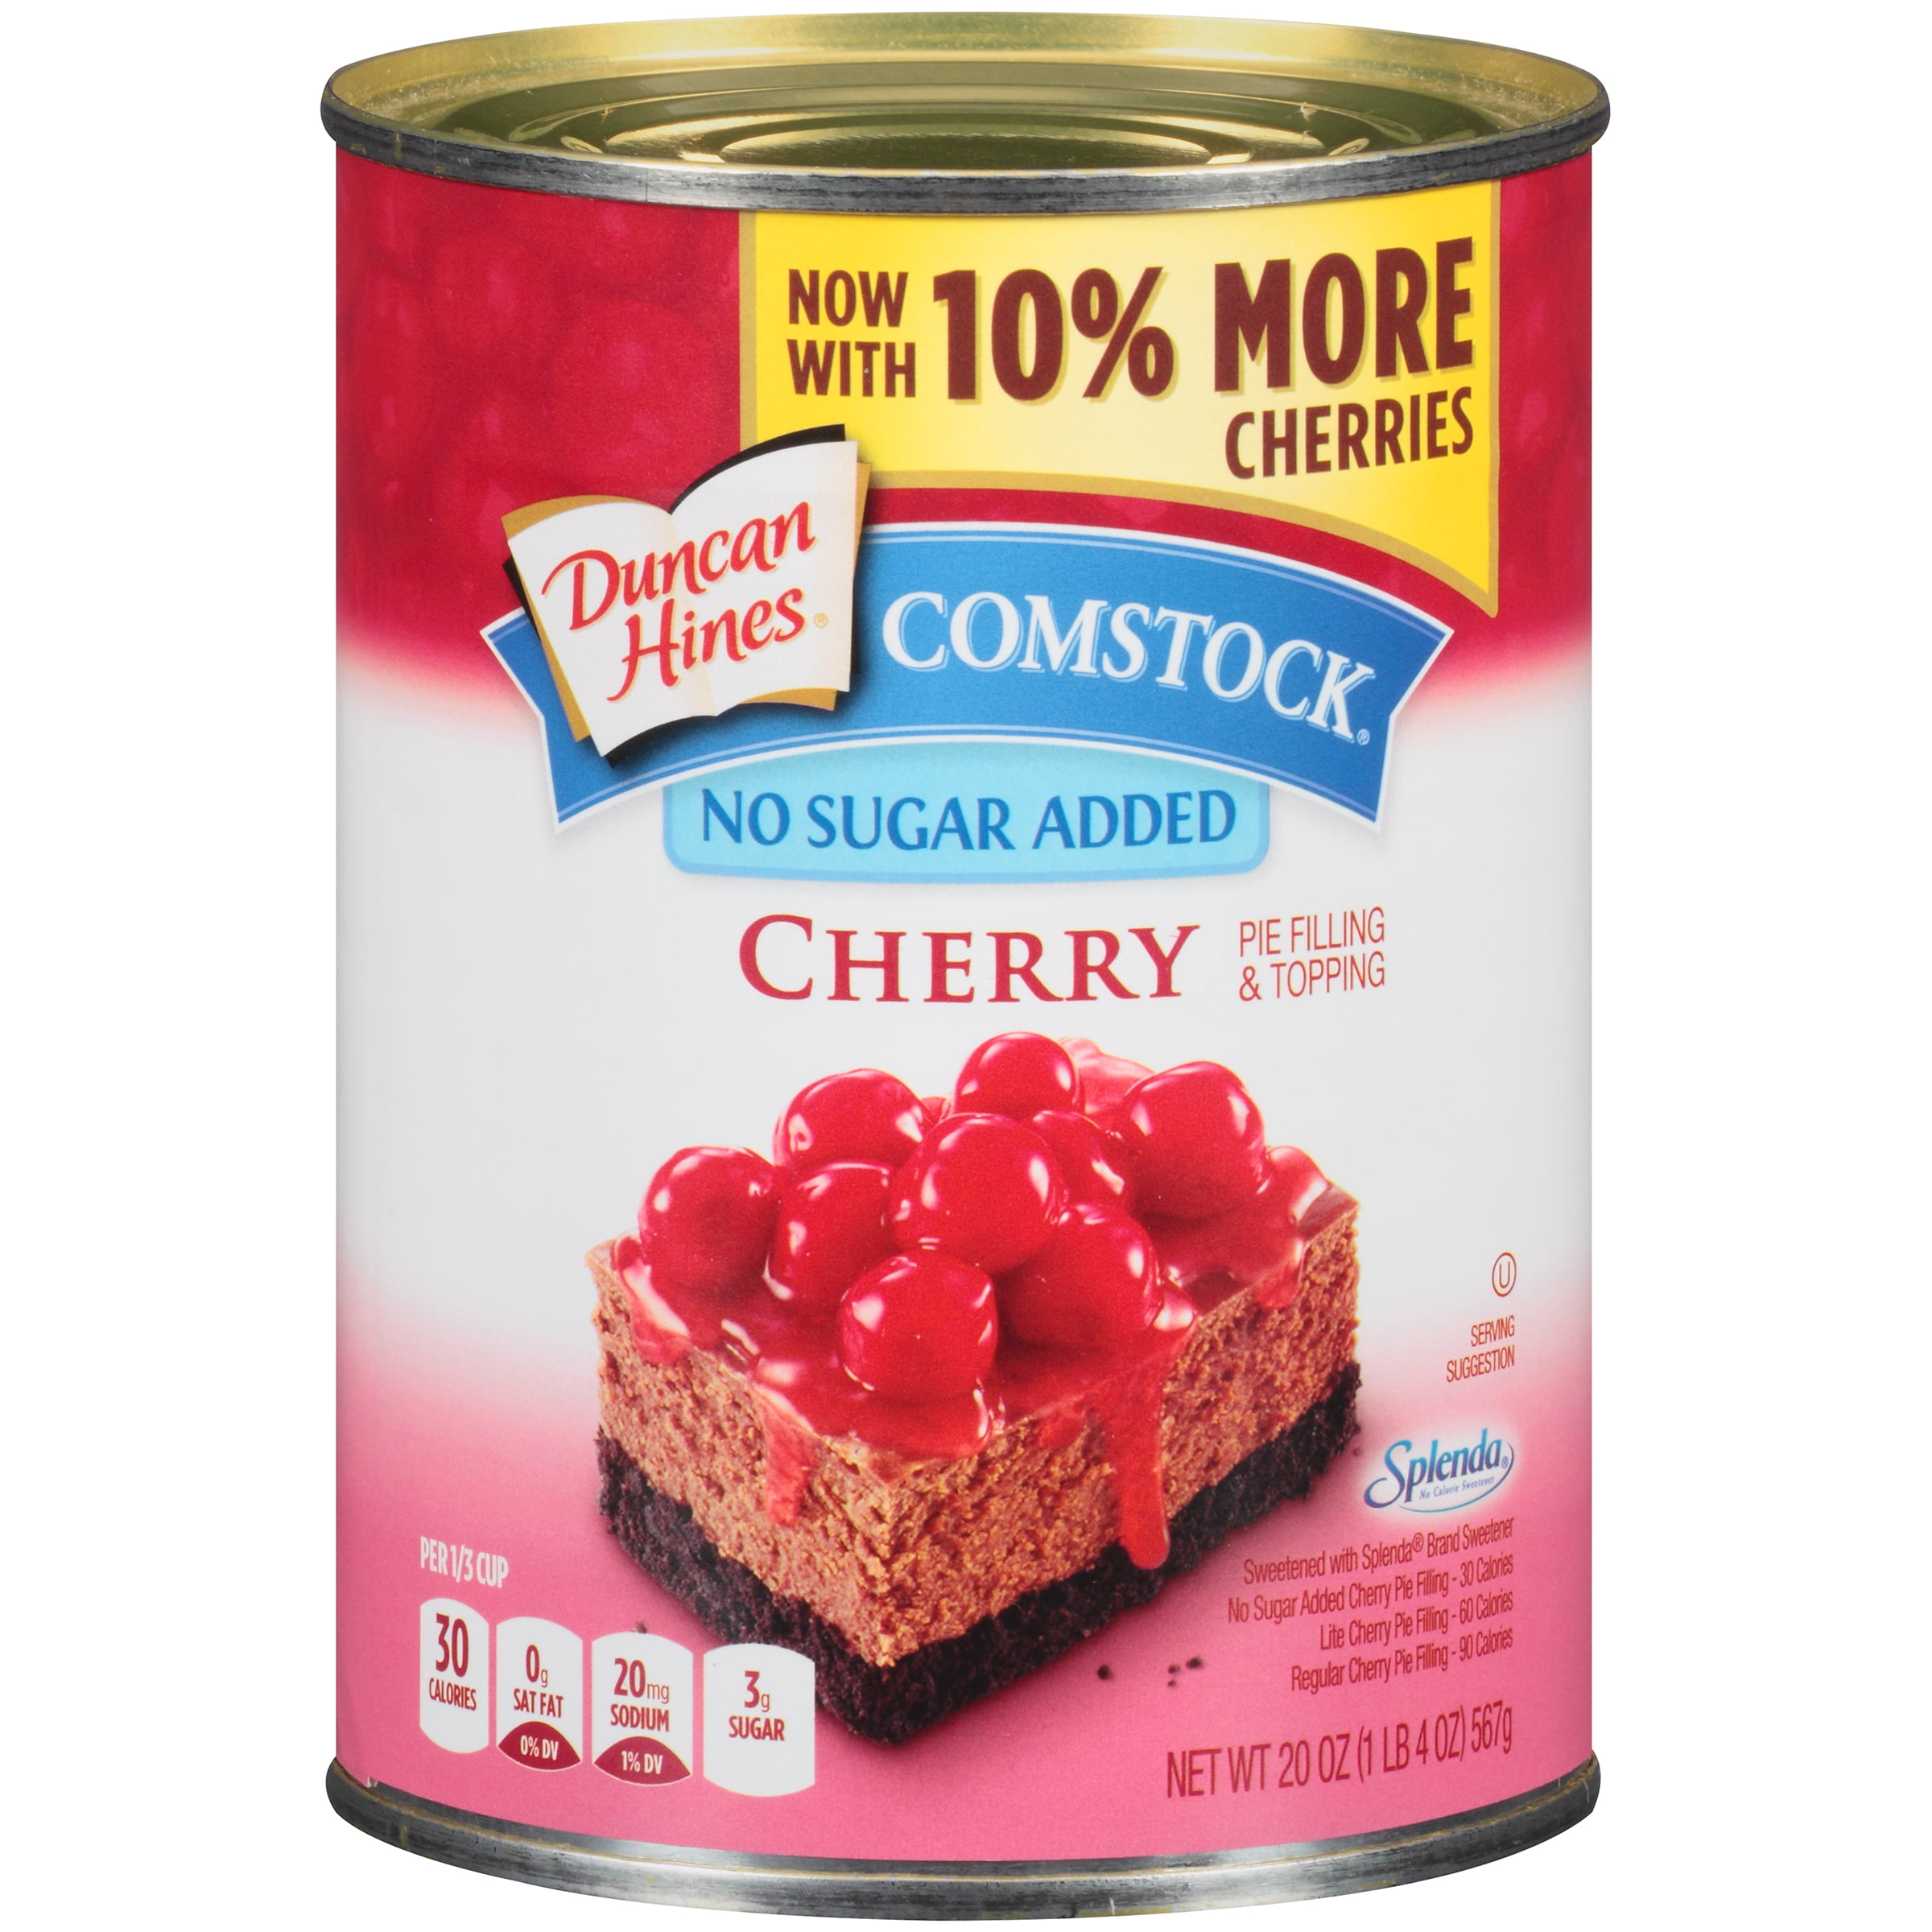 Duncan Hines Comstock No Sugar Added Cherry Pie Filling & Topping 20 Oz